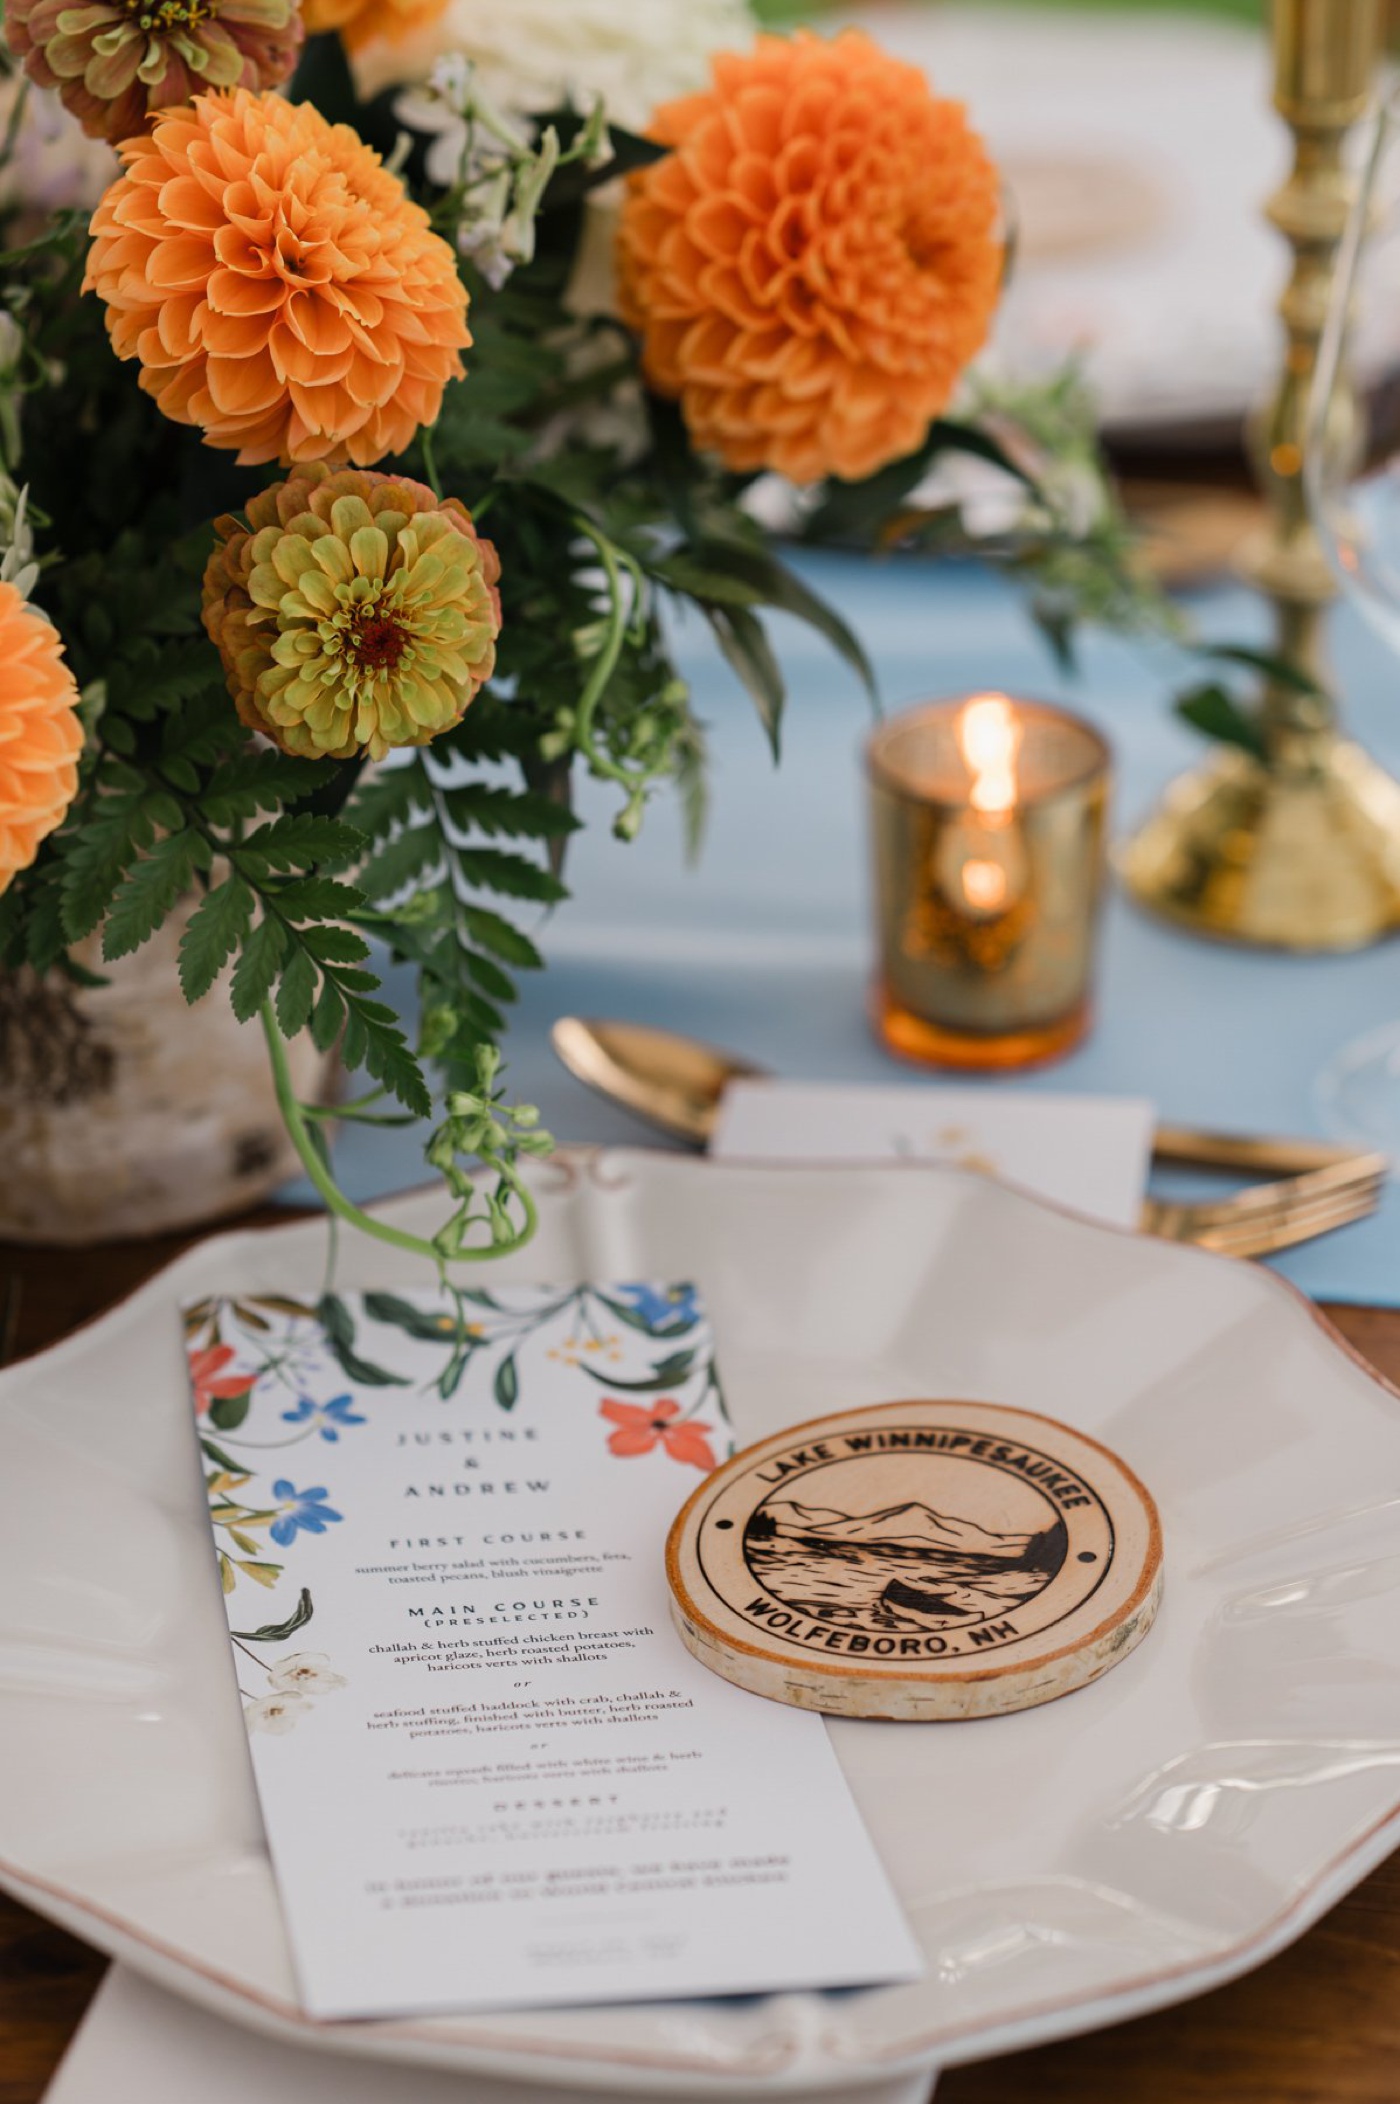 Summer wedding table with light blue linen and orange flowers